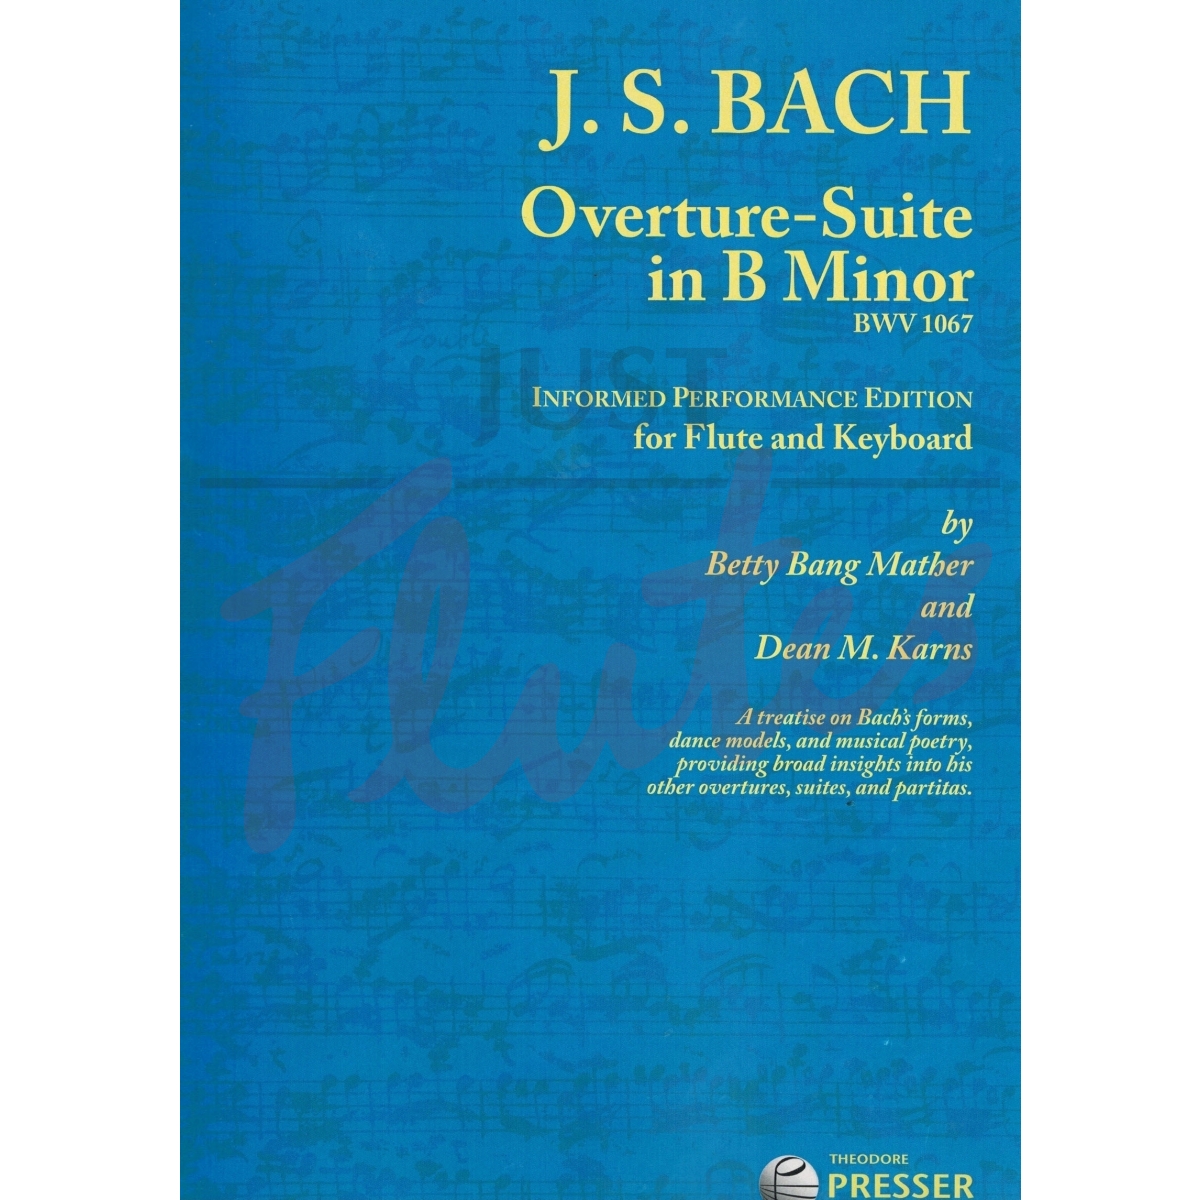 Overture-Suite in B minor: Informed Performance Edition for Flute and Keyboard